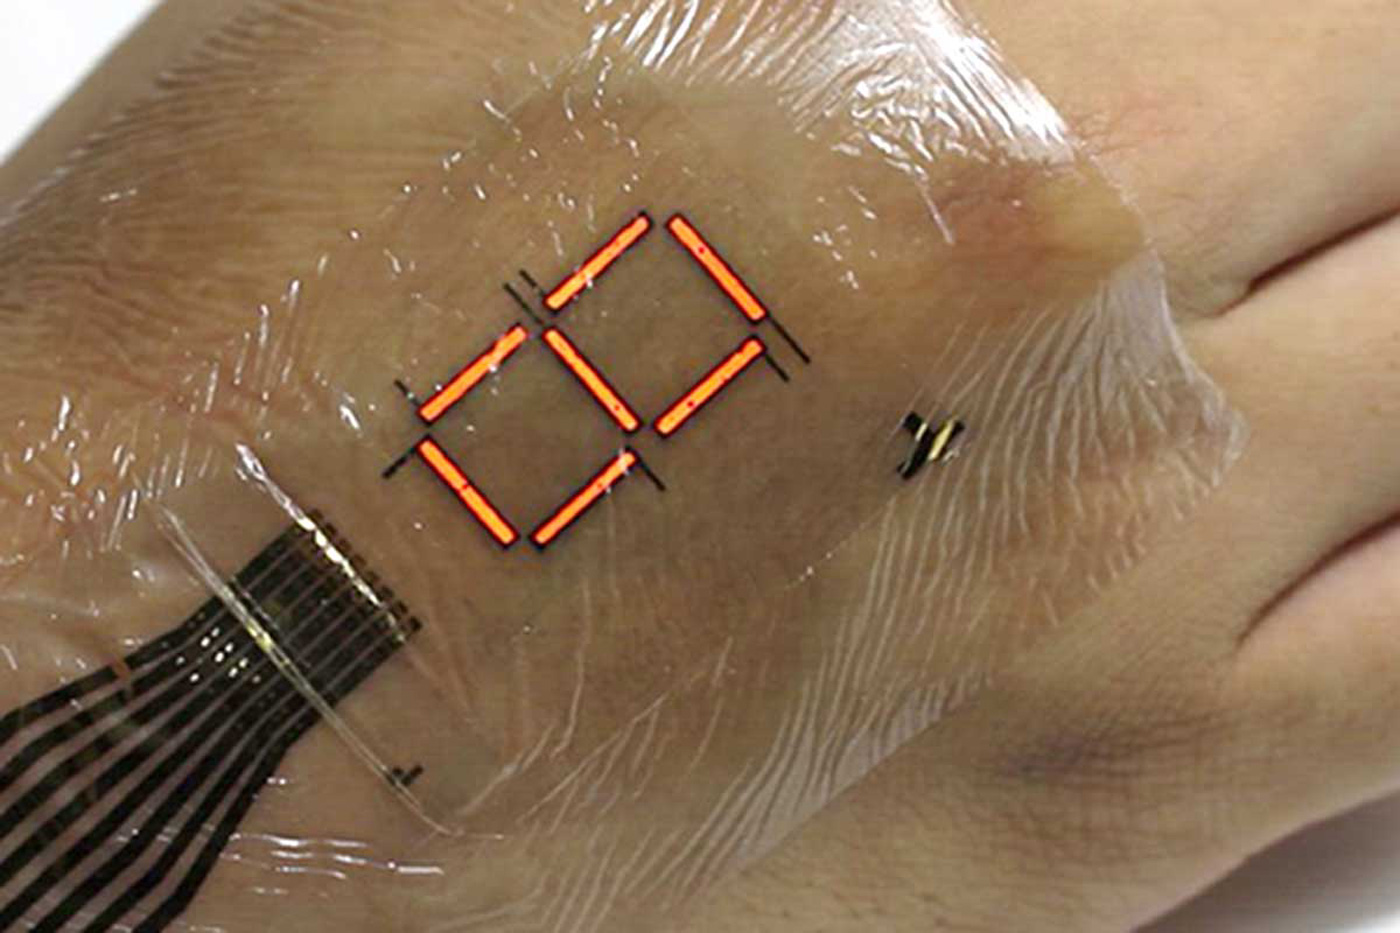 Extra-thin LEDs put a screen on your skin